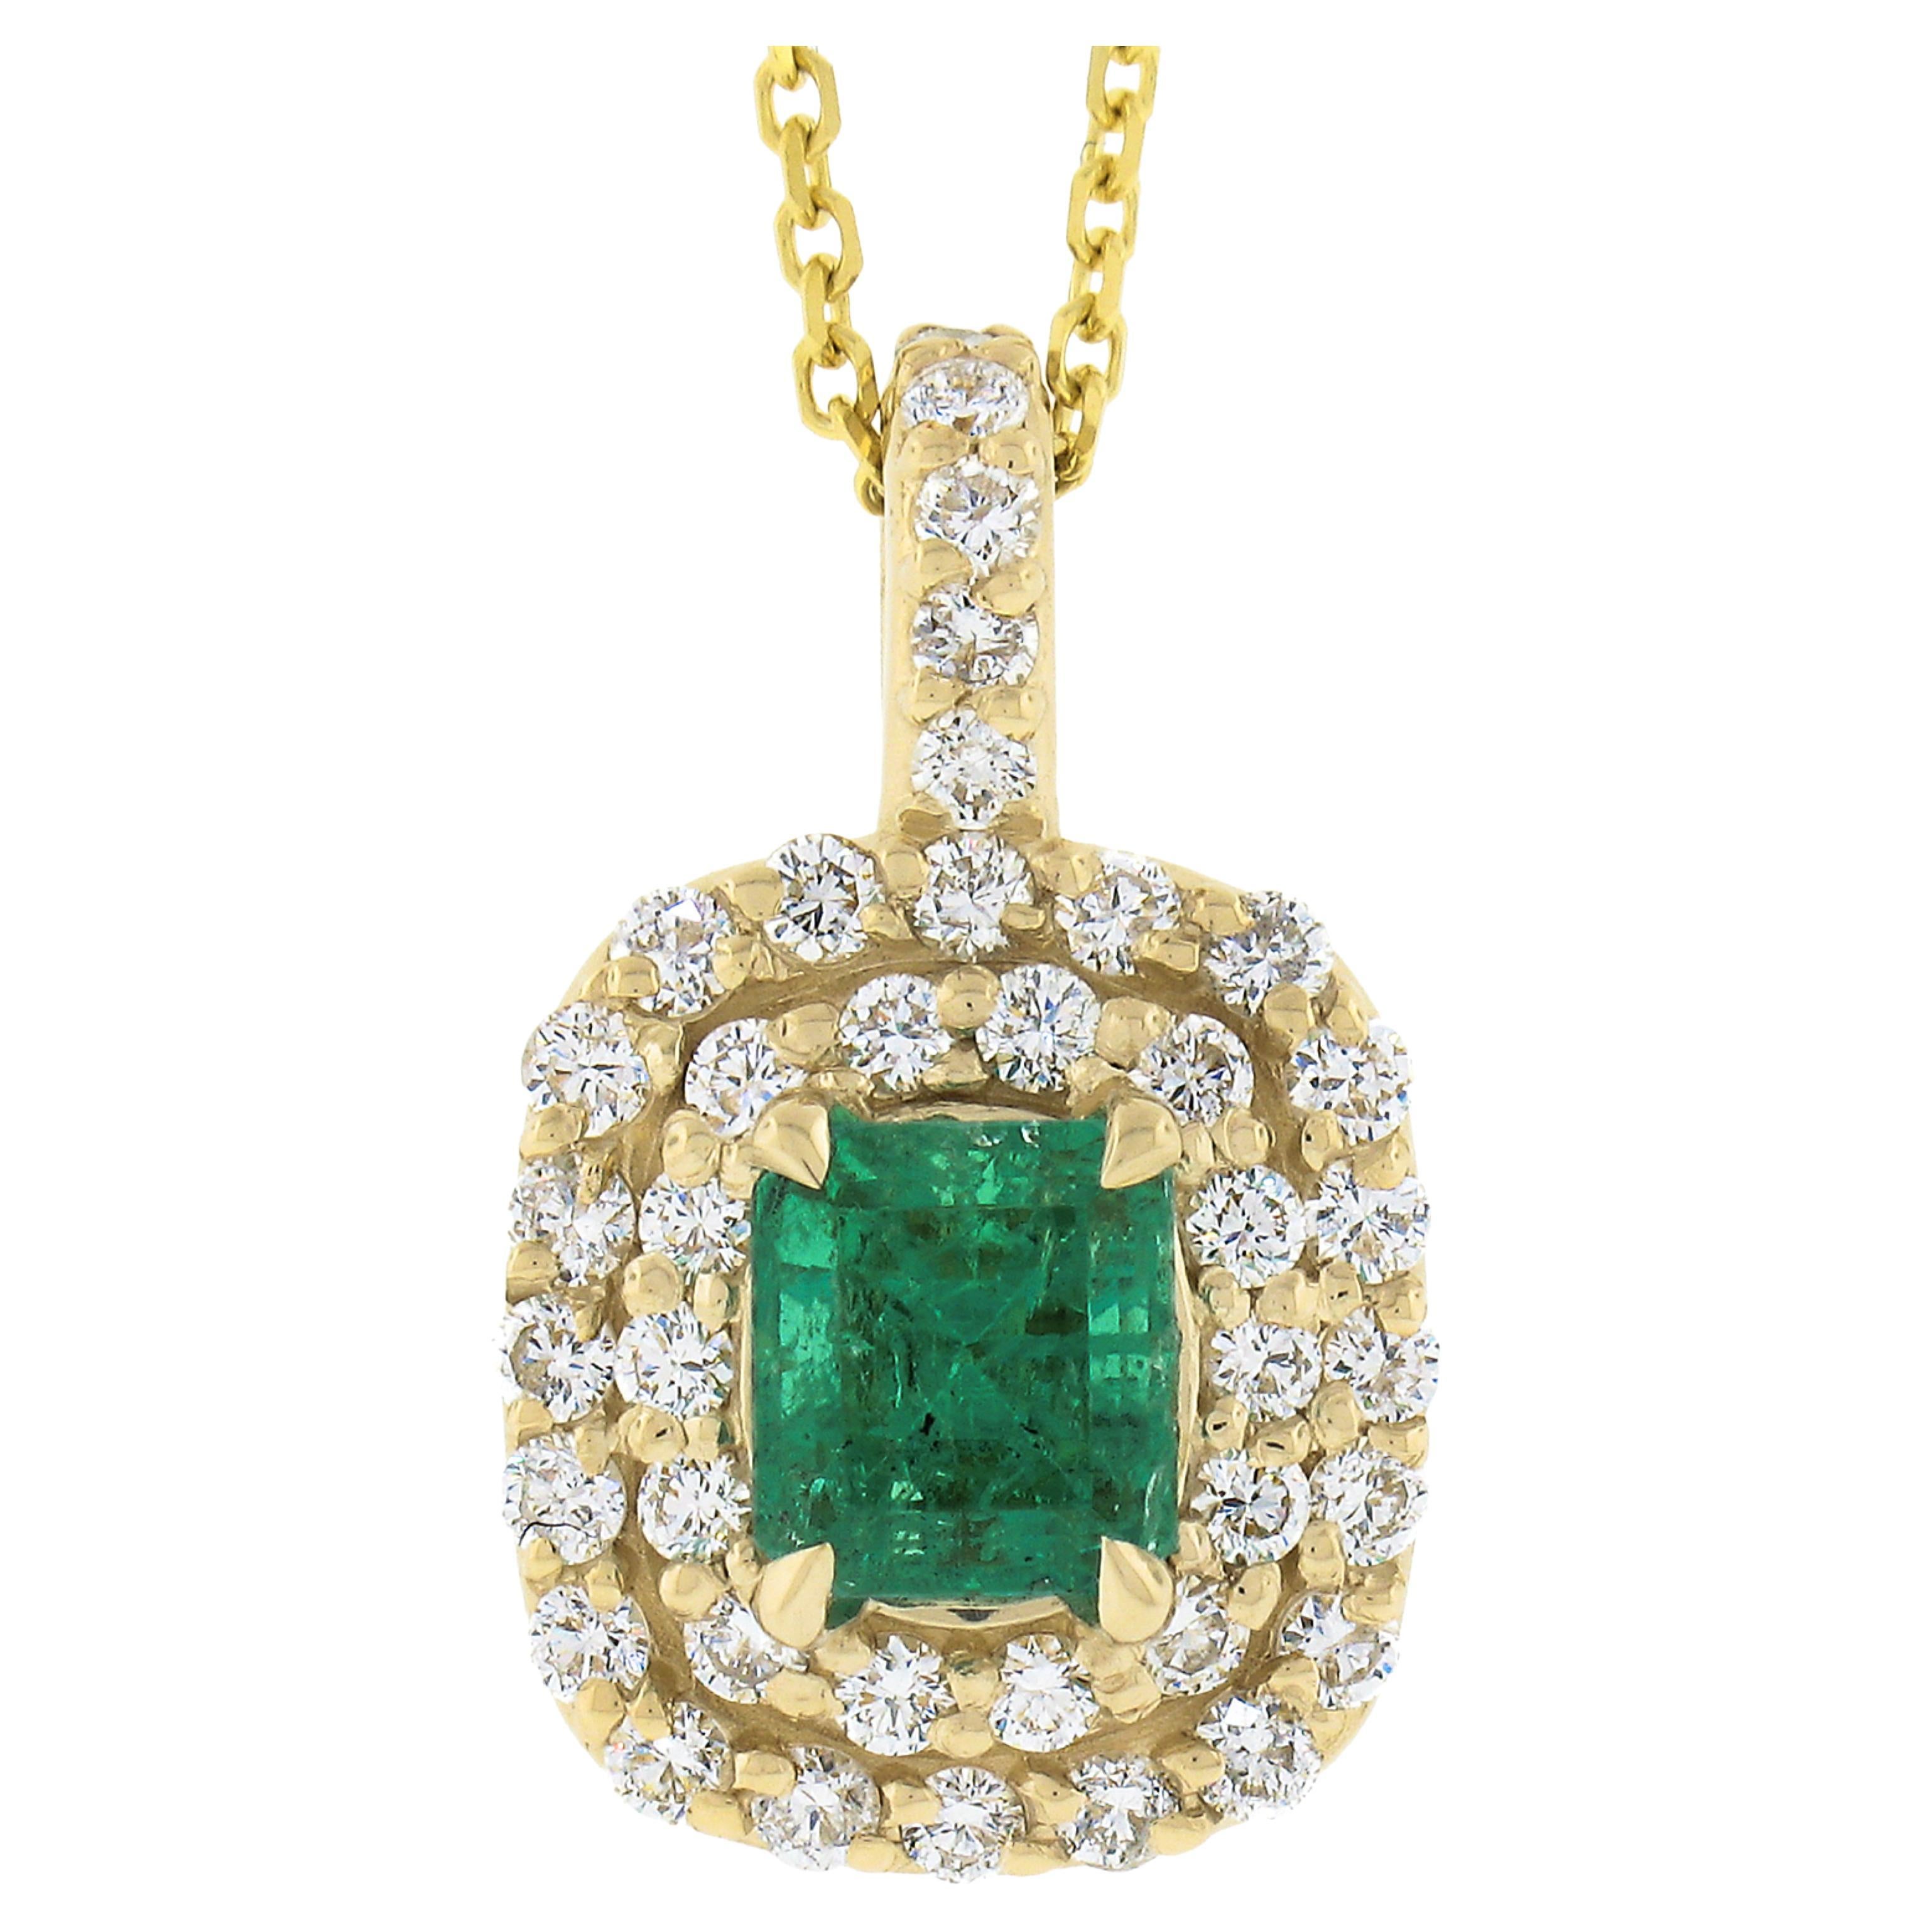 New 14k Gold 1.36ctw Gia Colombian Emerald & Dual Diamond Halo Pendant Necklace For Sale